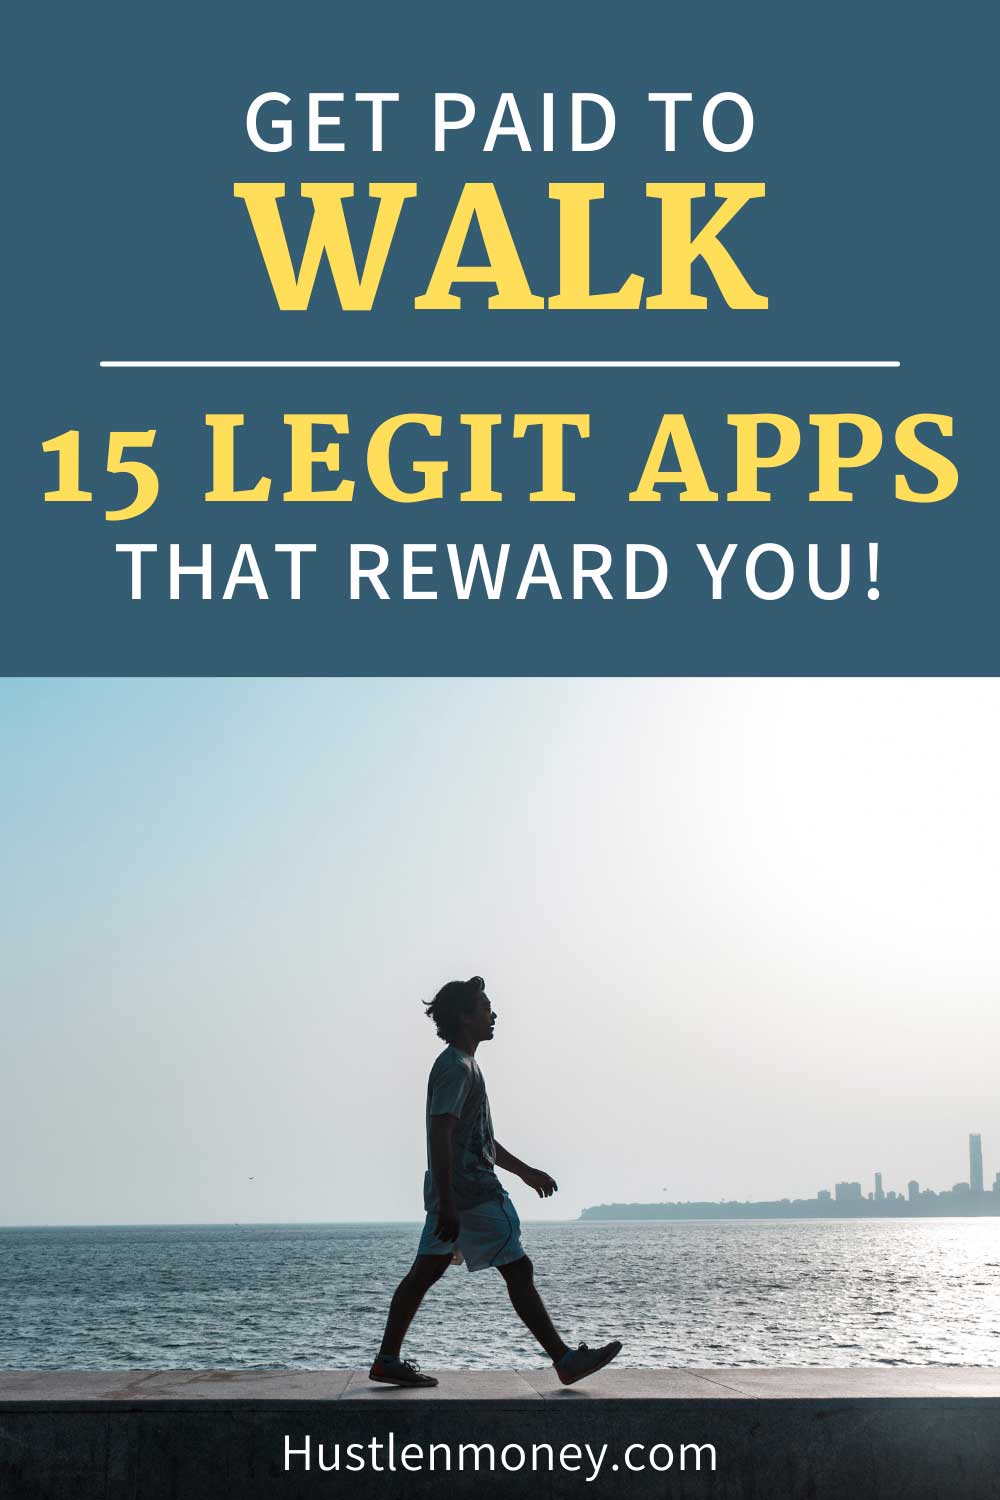 Get paid to walk